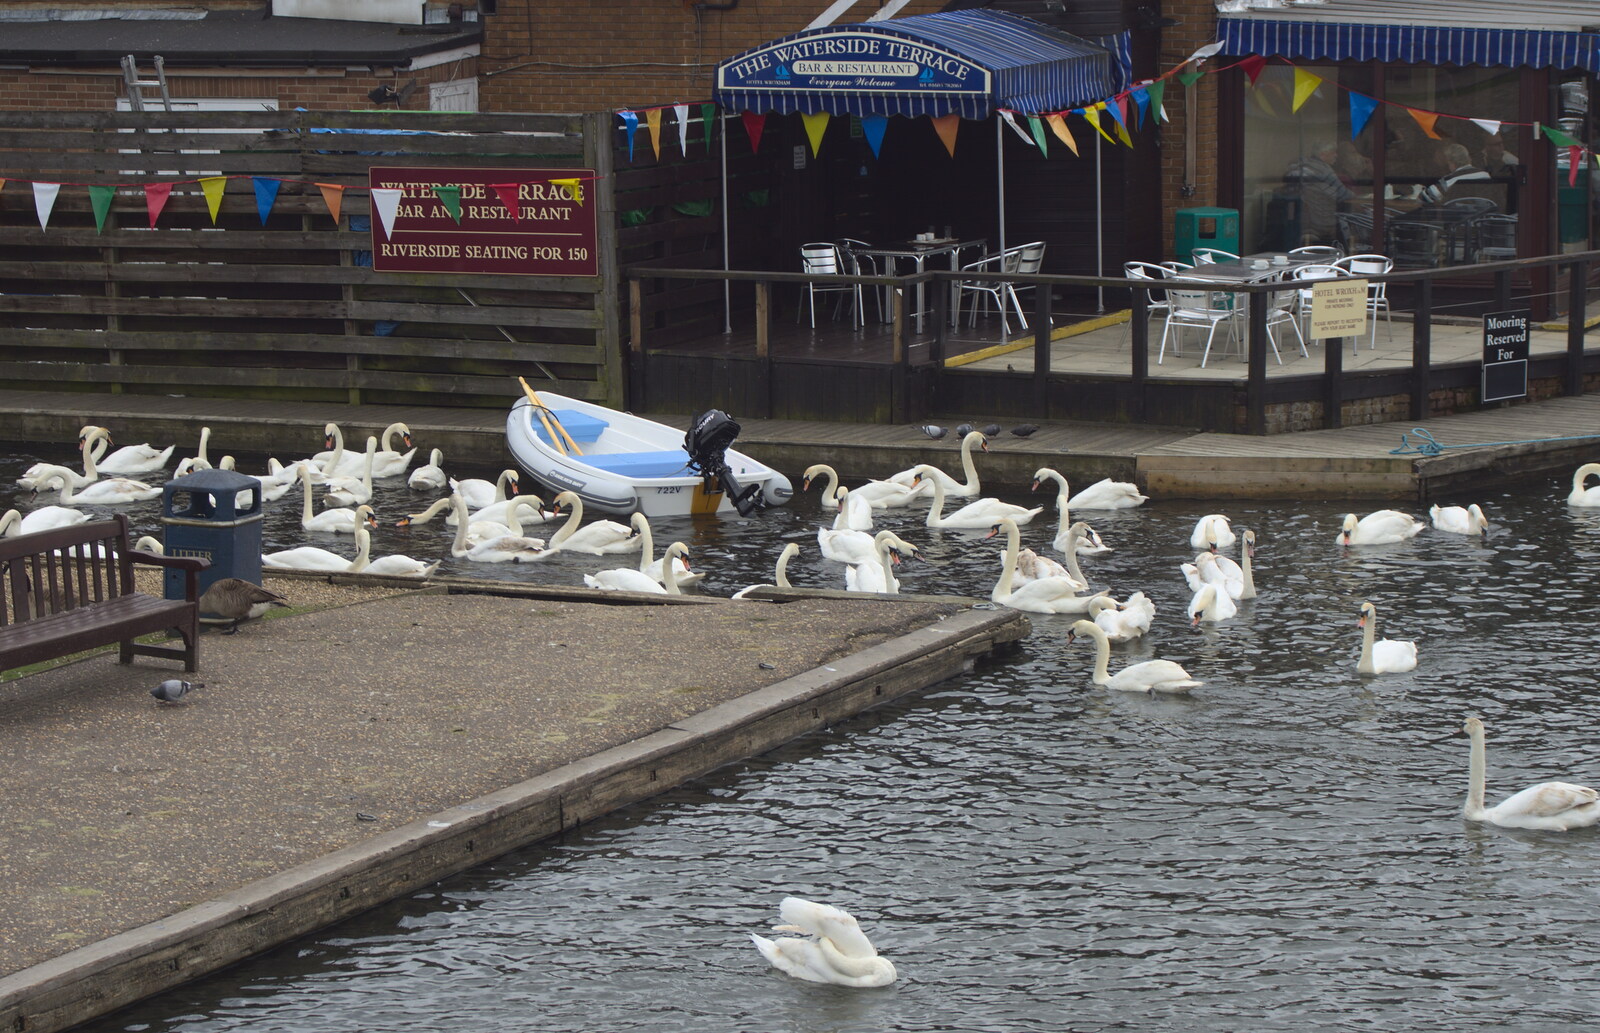 A gang of swans by the Waterside Terrace from A Trip on the Norfolk Broads, Wroxham, Norfolk - 25th May 2013